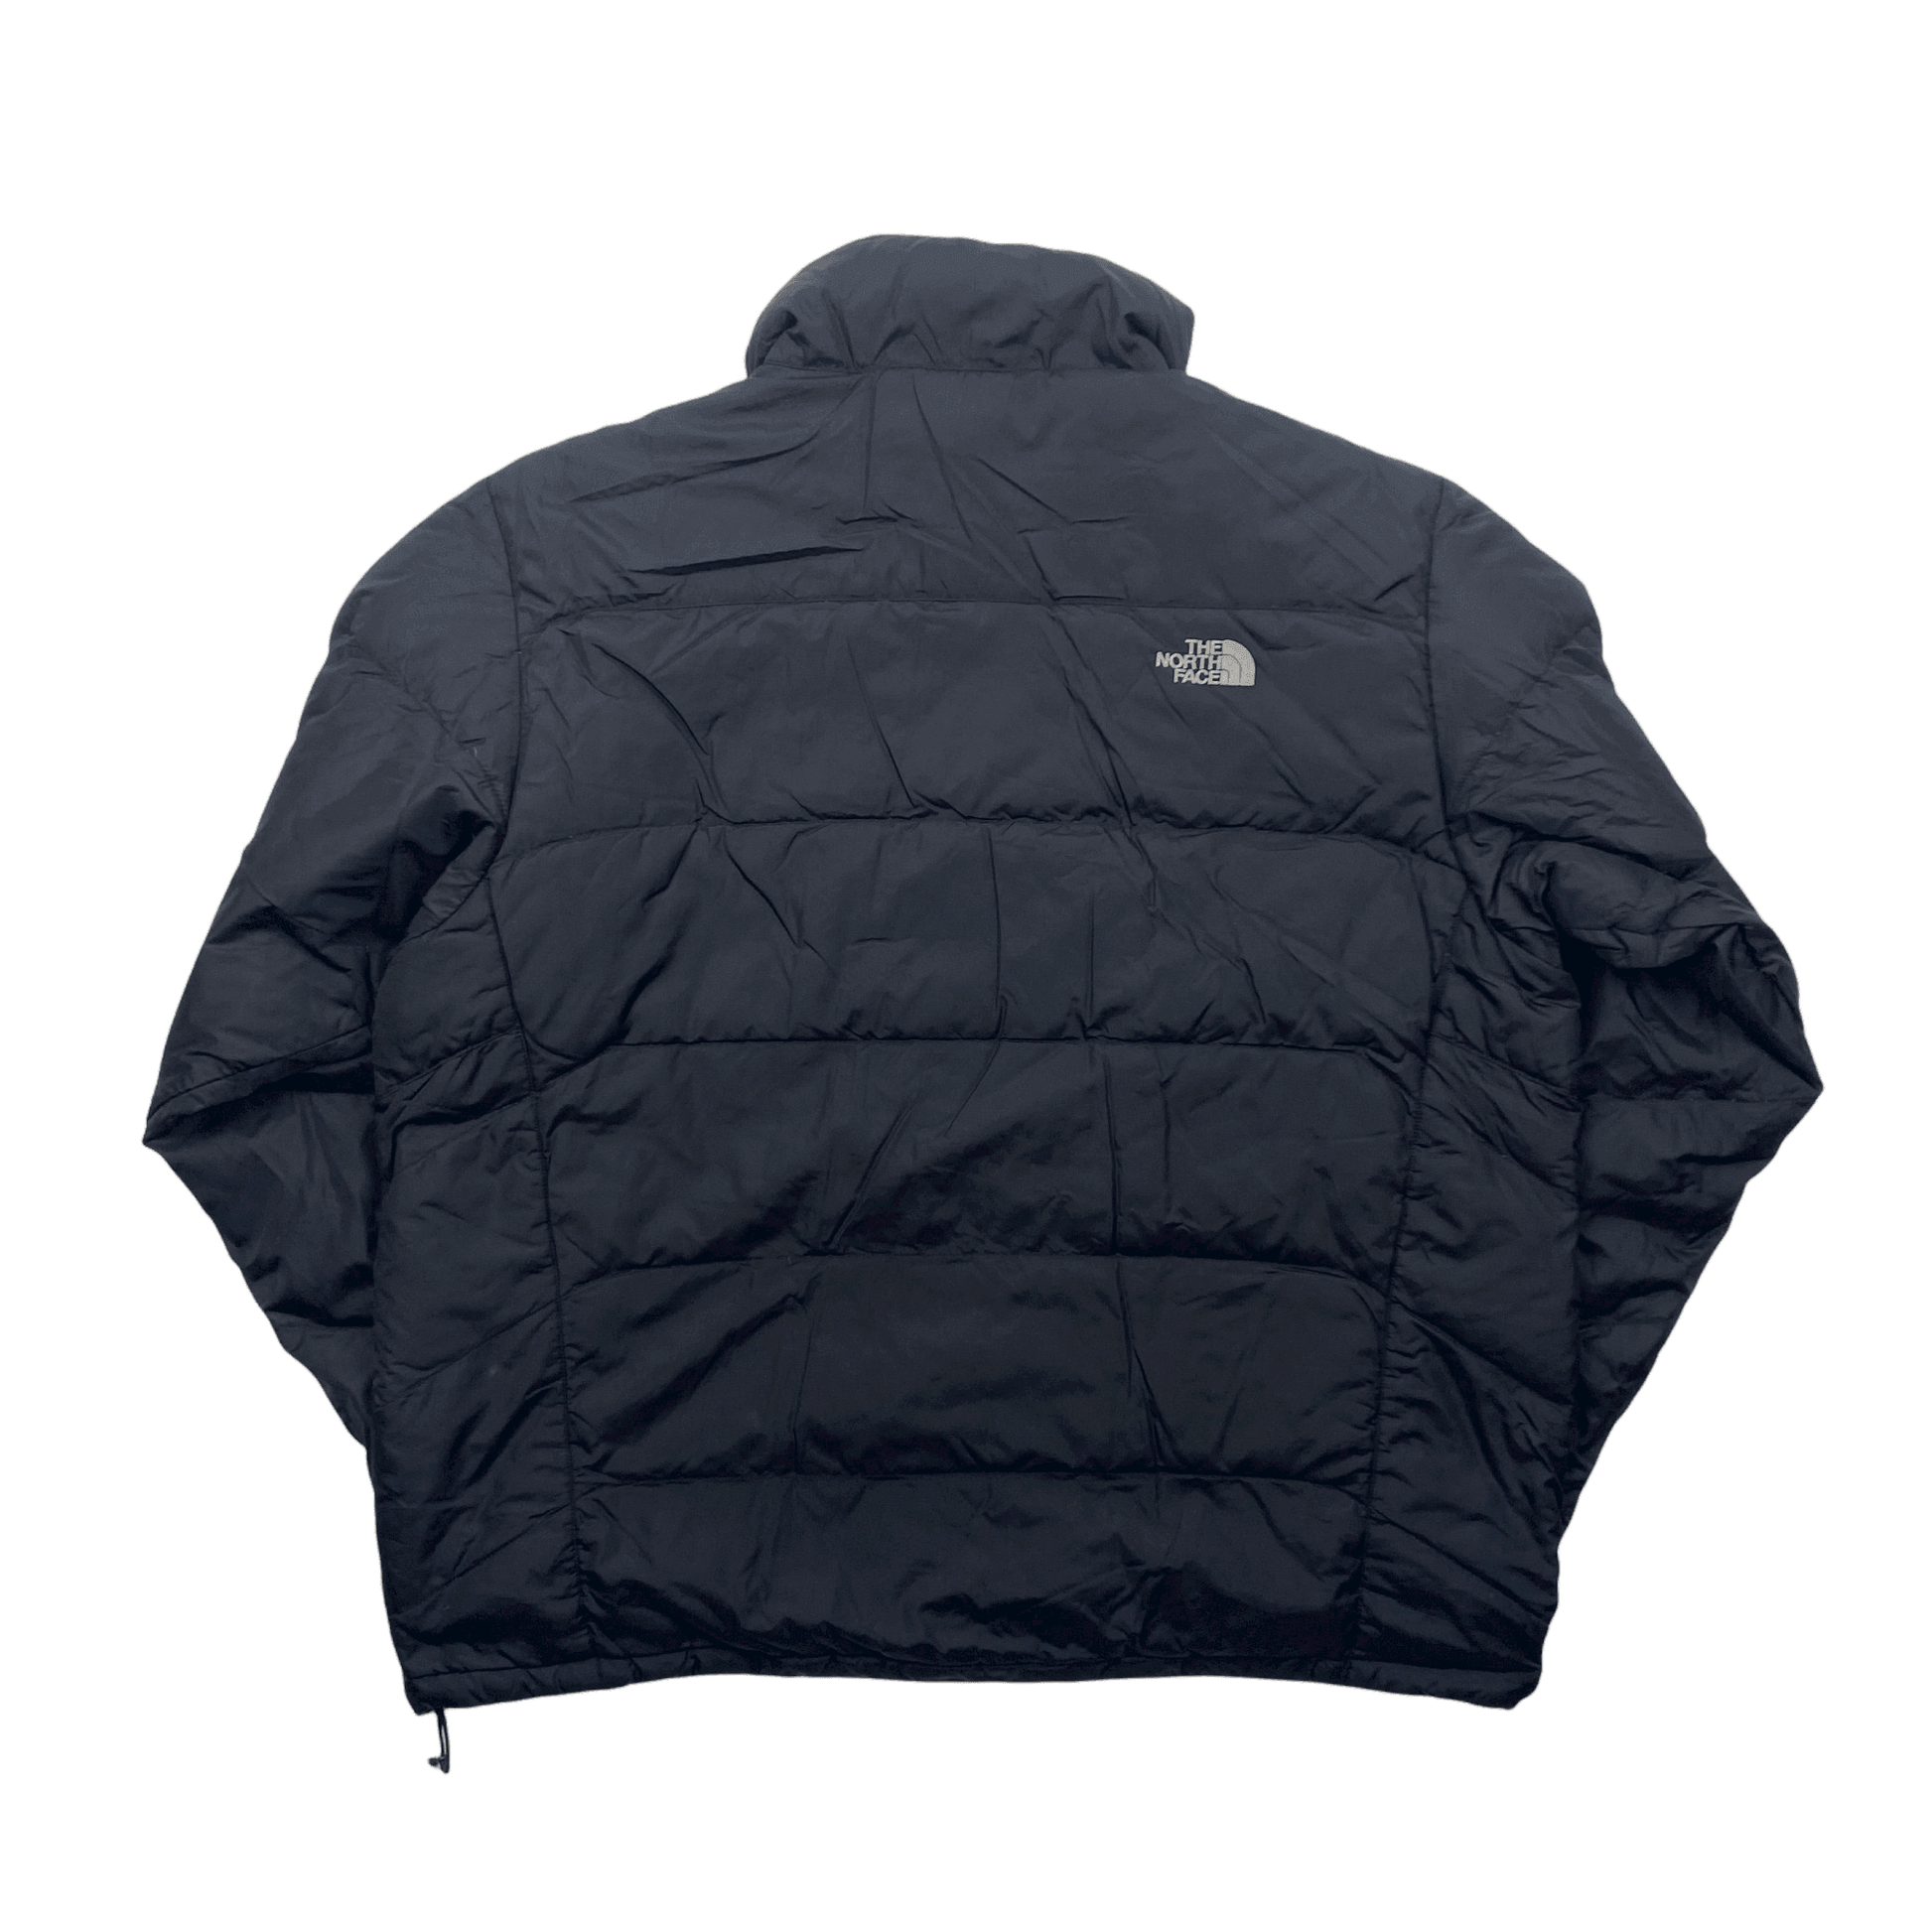 Vintage Black The North Face (TNF) Coat/ Jacket - Extra Large - The Streetwear Studio